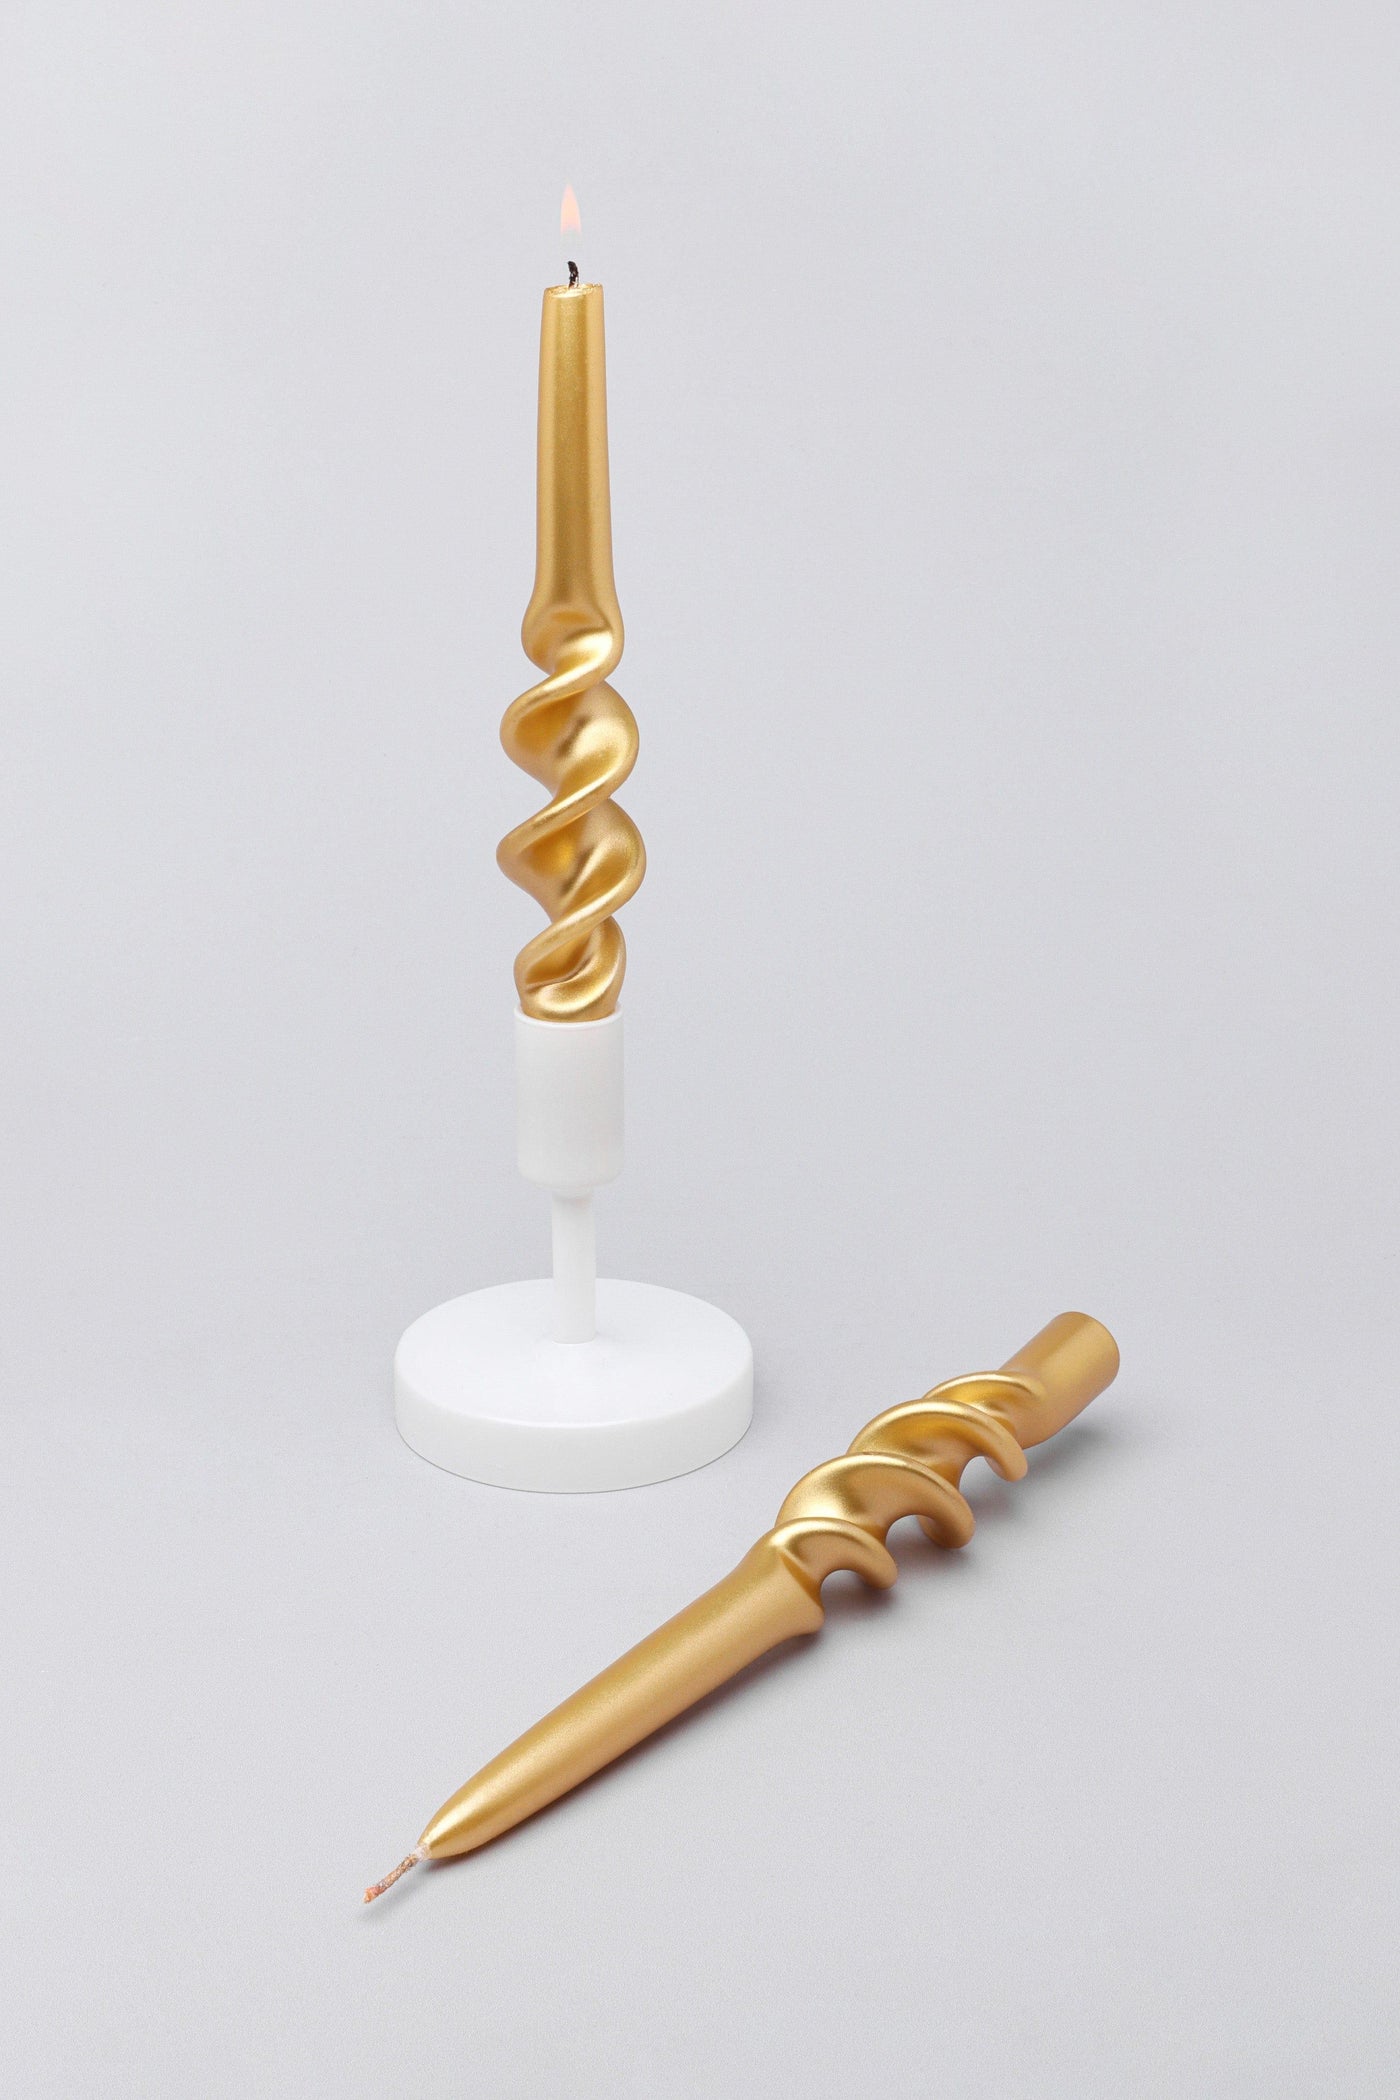 Gdecorstore Candles & Candle Holders Gold Set of 2 Gold 9-inch Spiral Twisted Hand Dipped Taper Candlesticks Church Dinner Candles